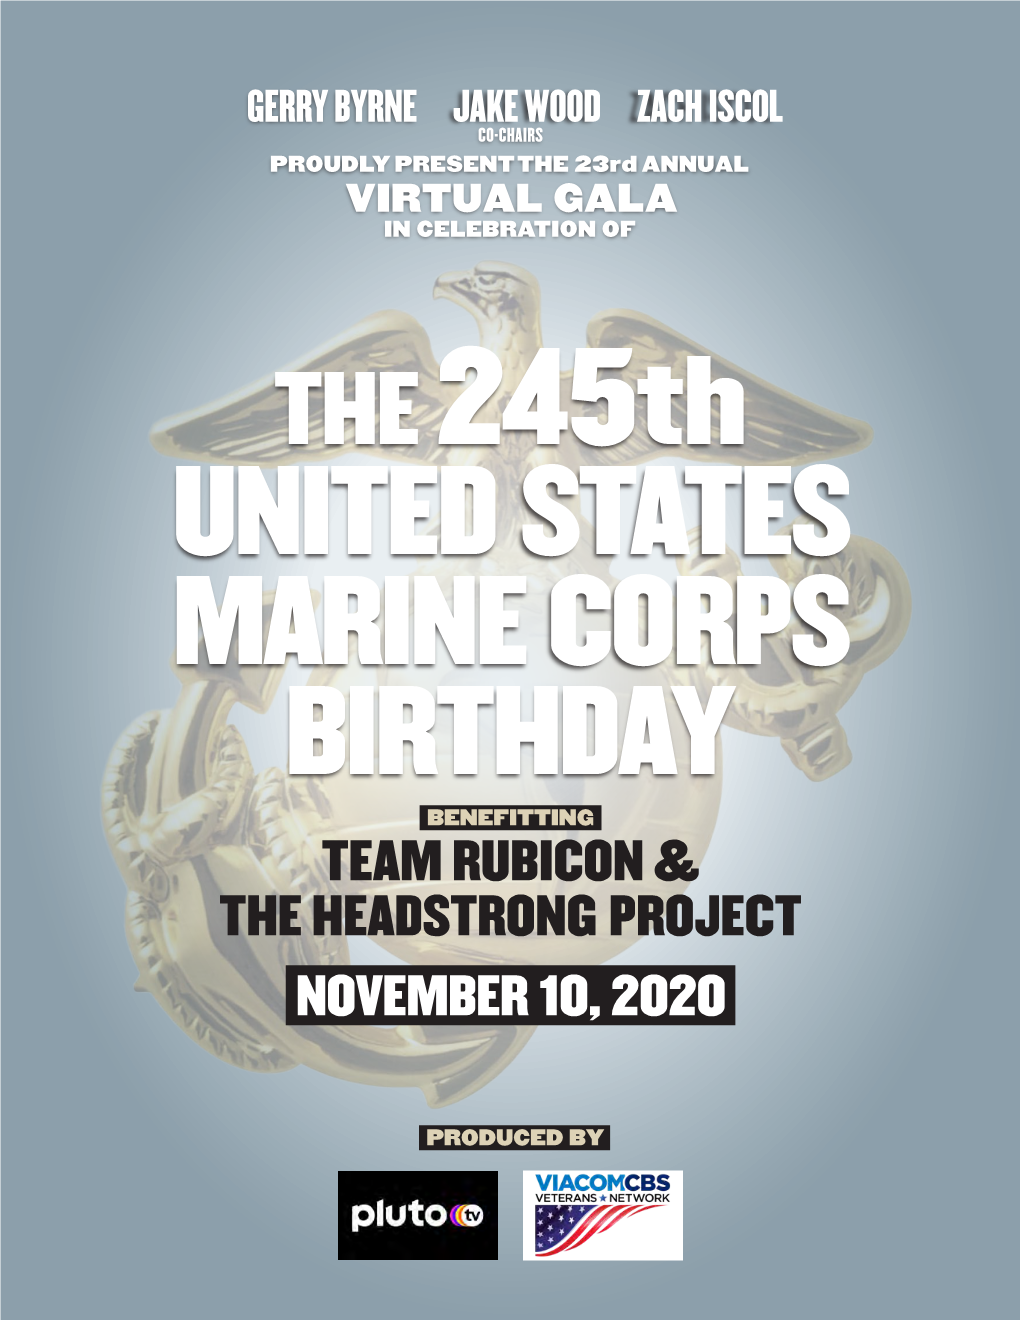 United States Marine Corps Birthday Benefitting Team Rubicon & the Headstrong Project November 10, 2020